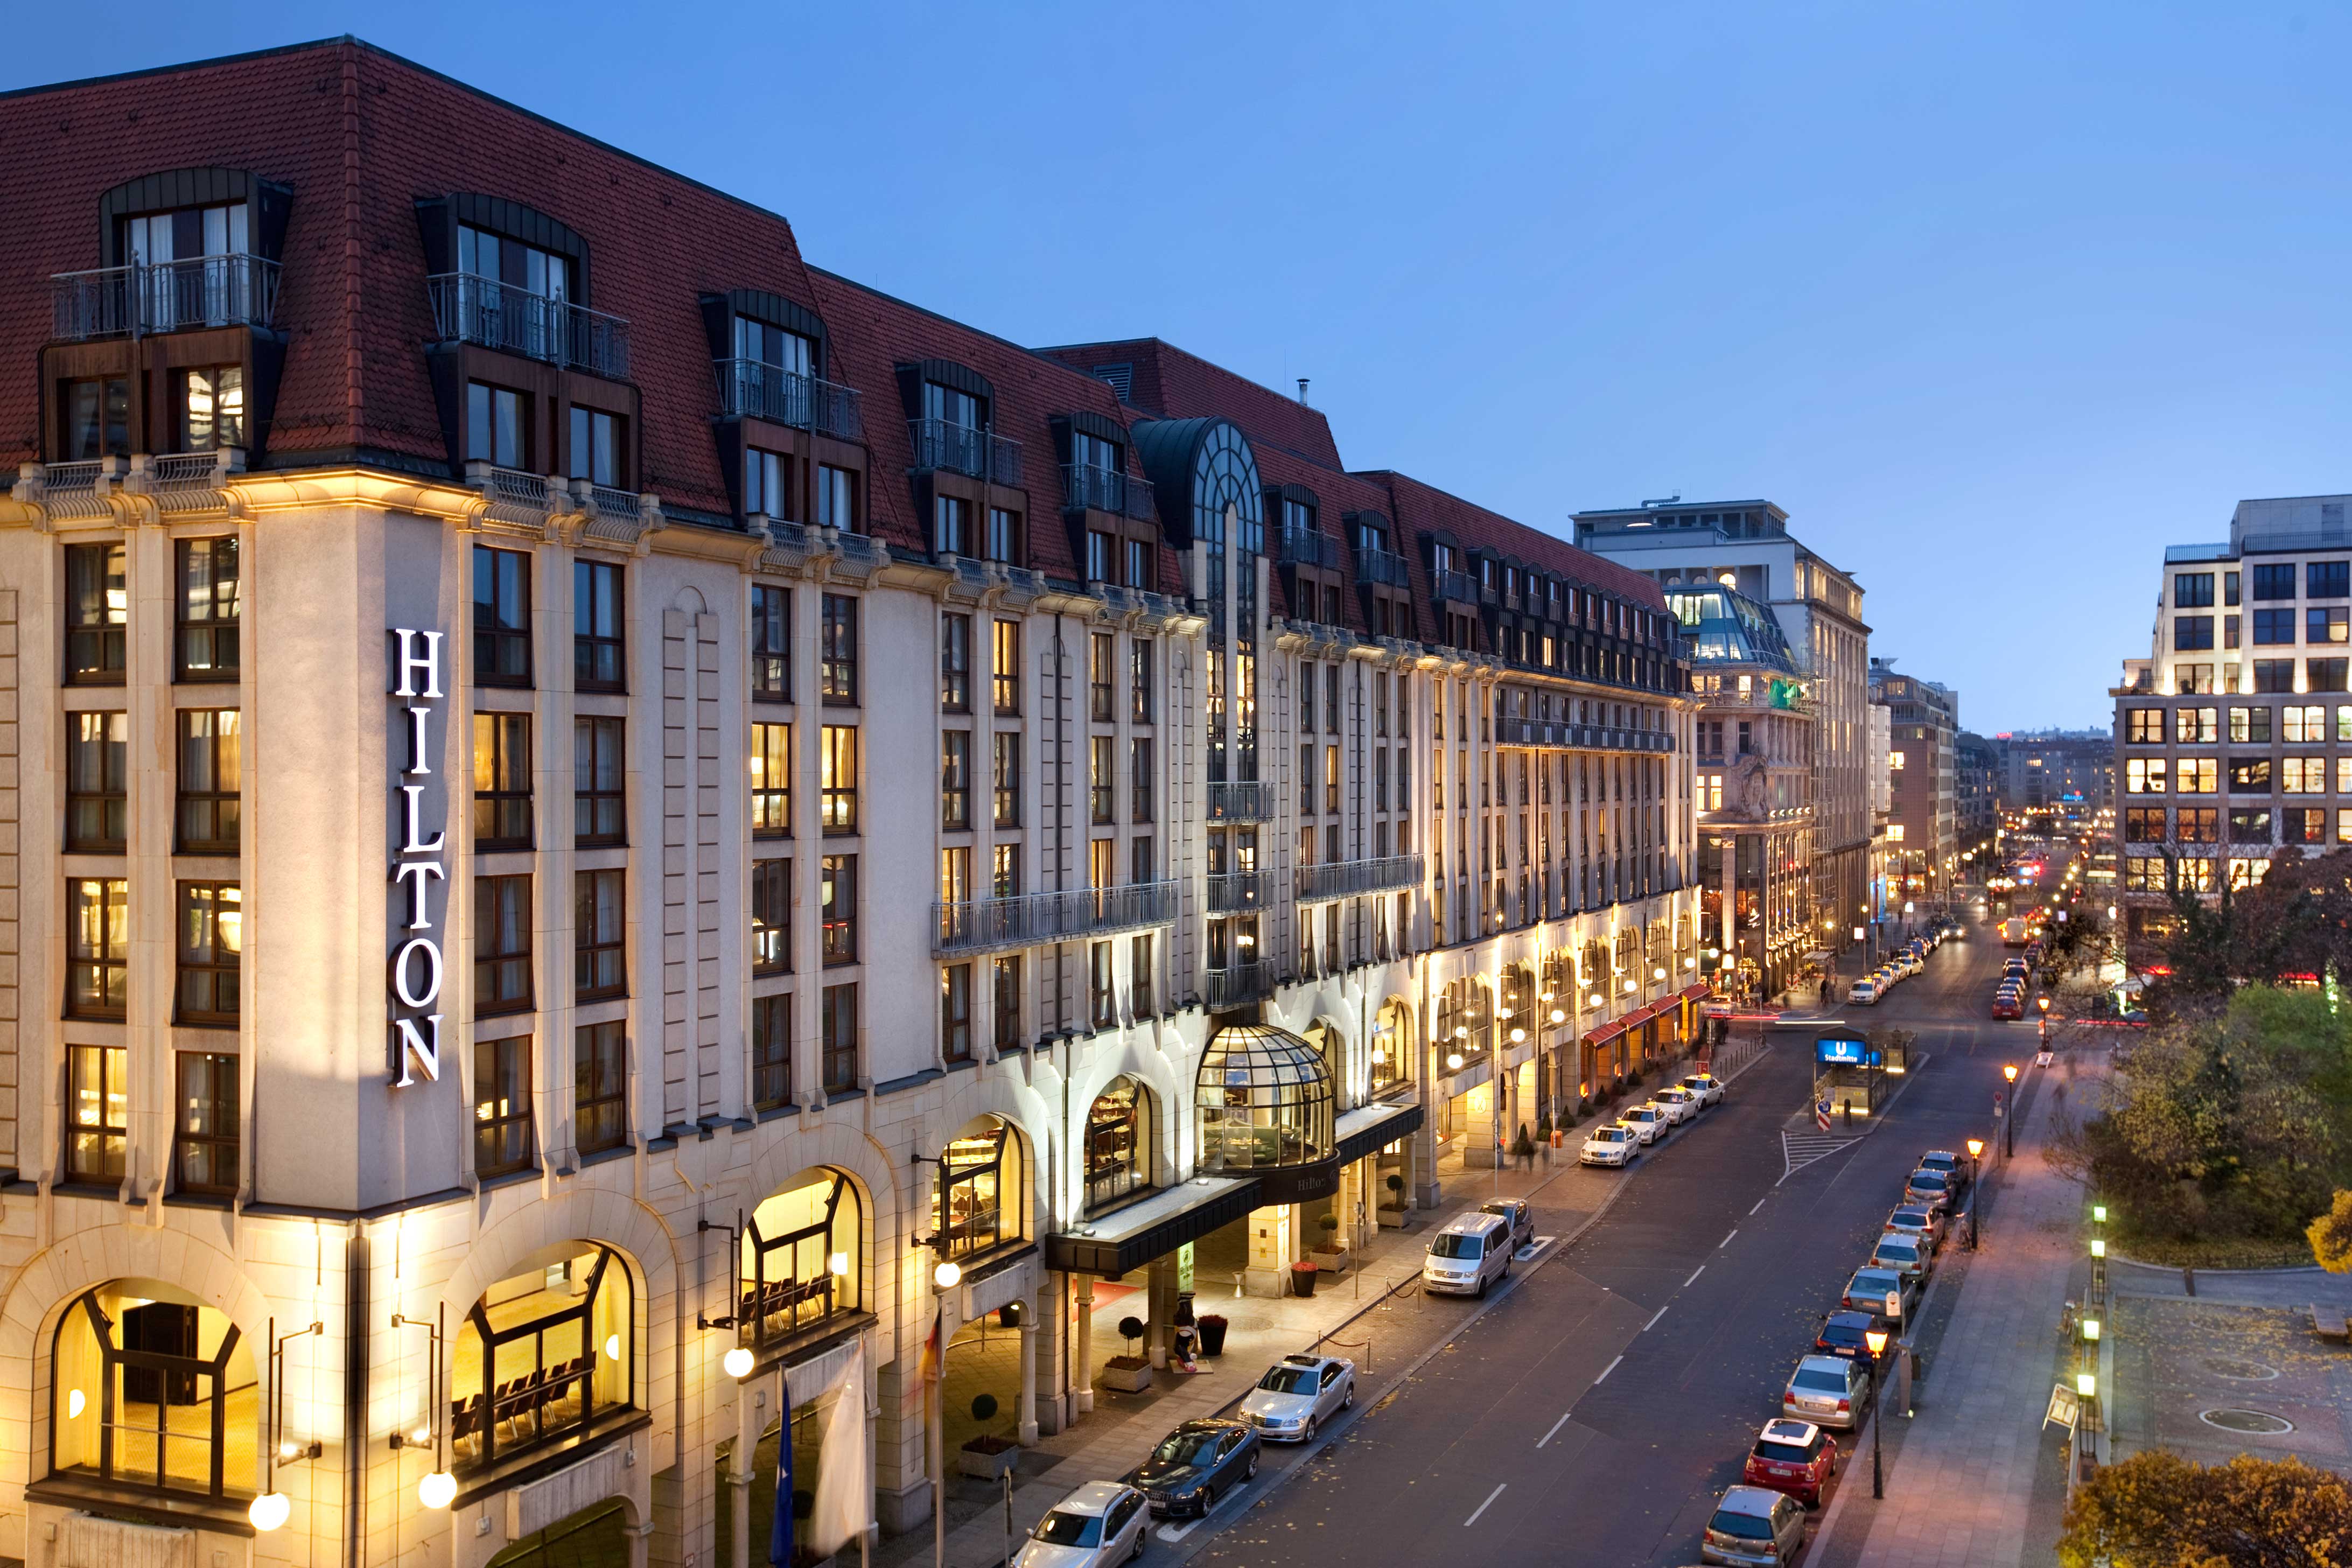 Meetings & Events at Hilton Berlin, Berlin, Germany | Conference Hotel